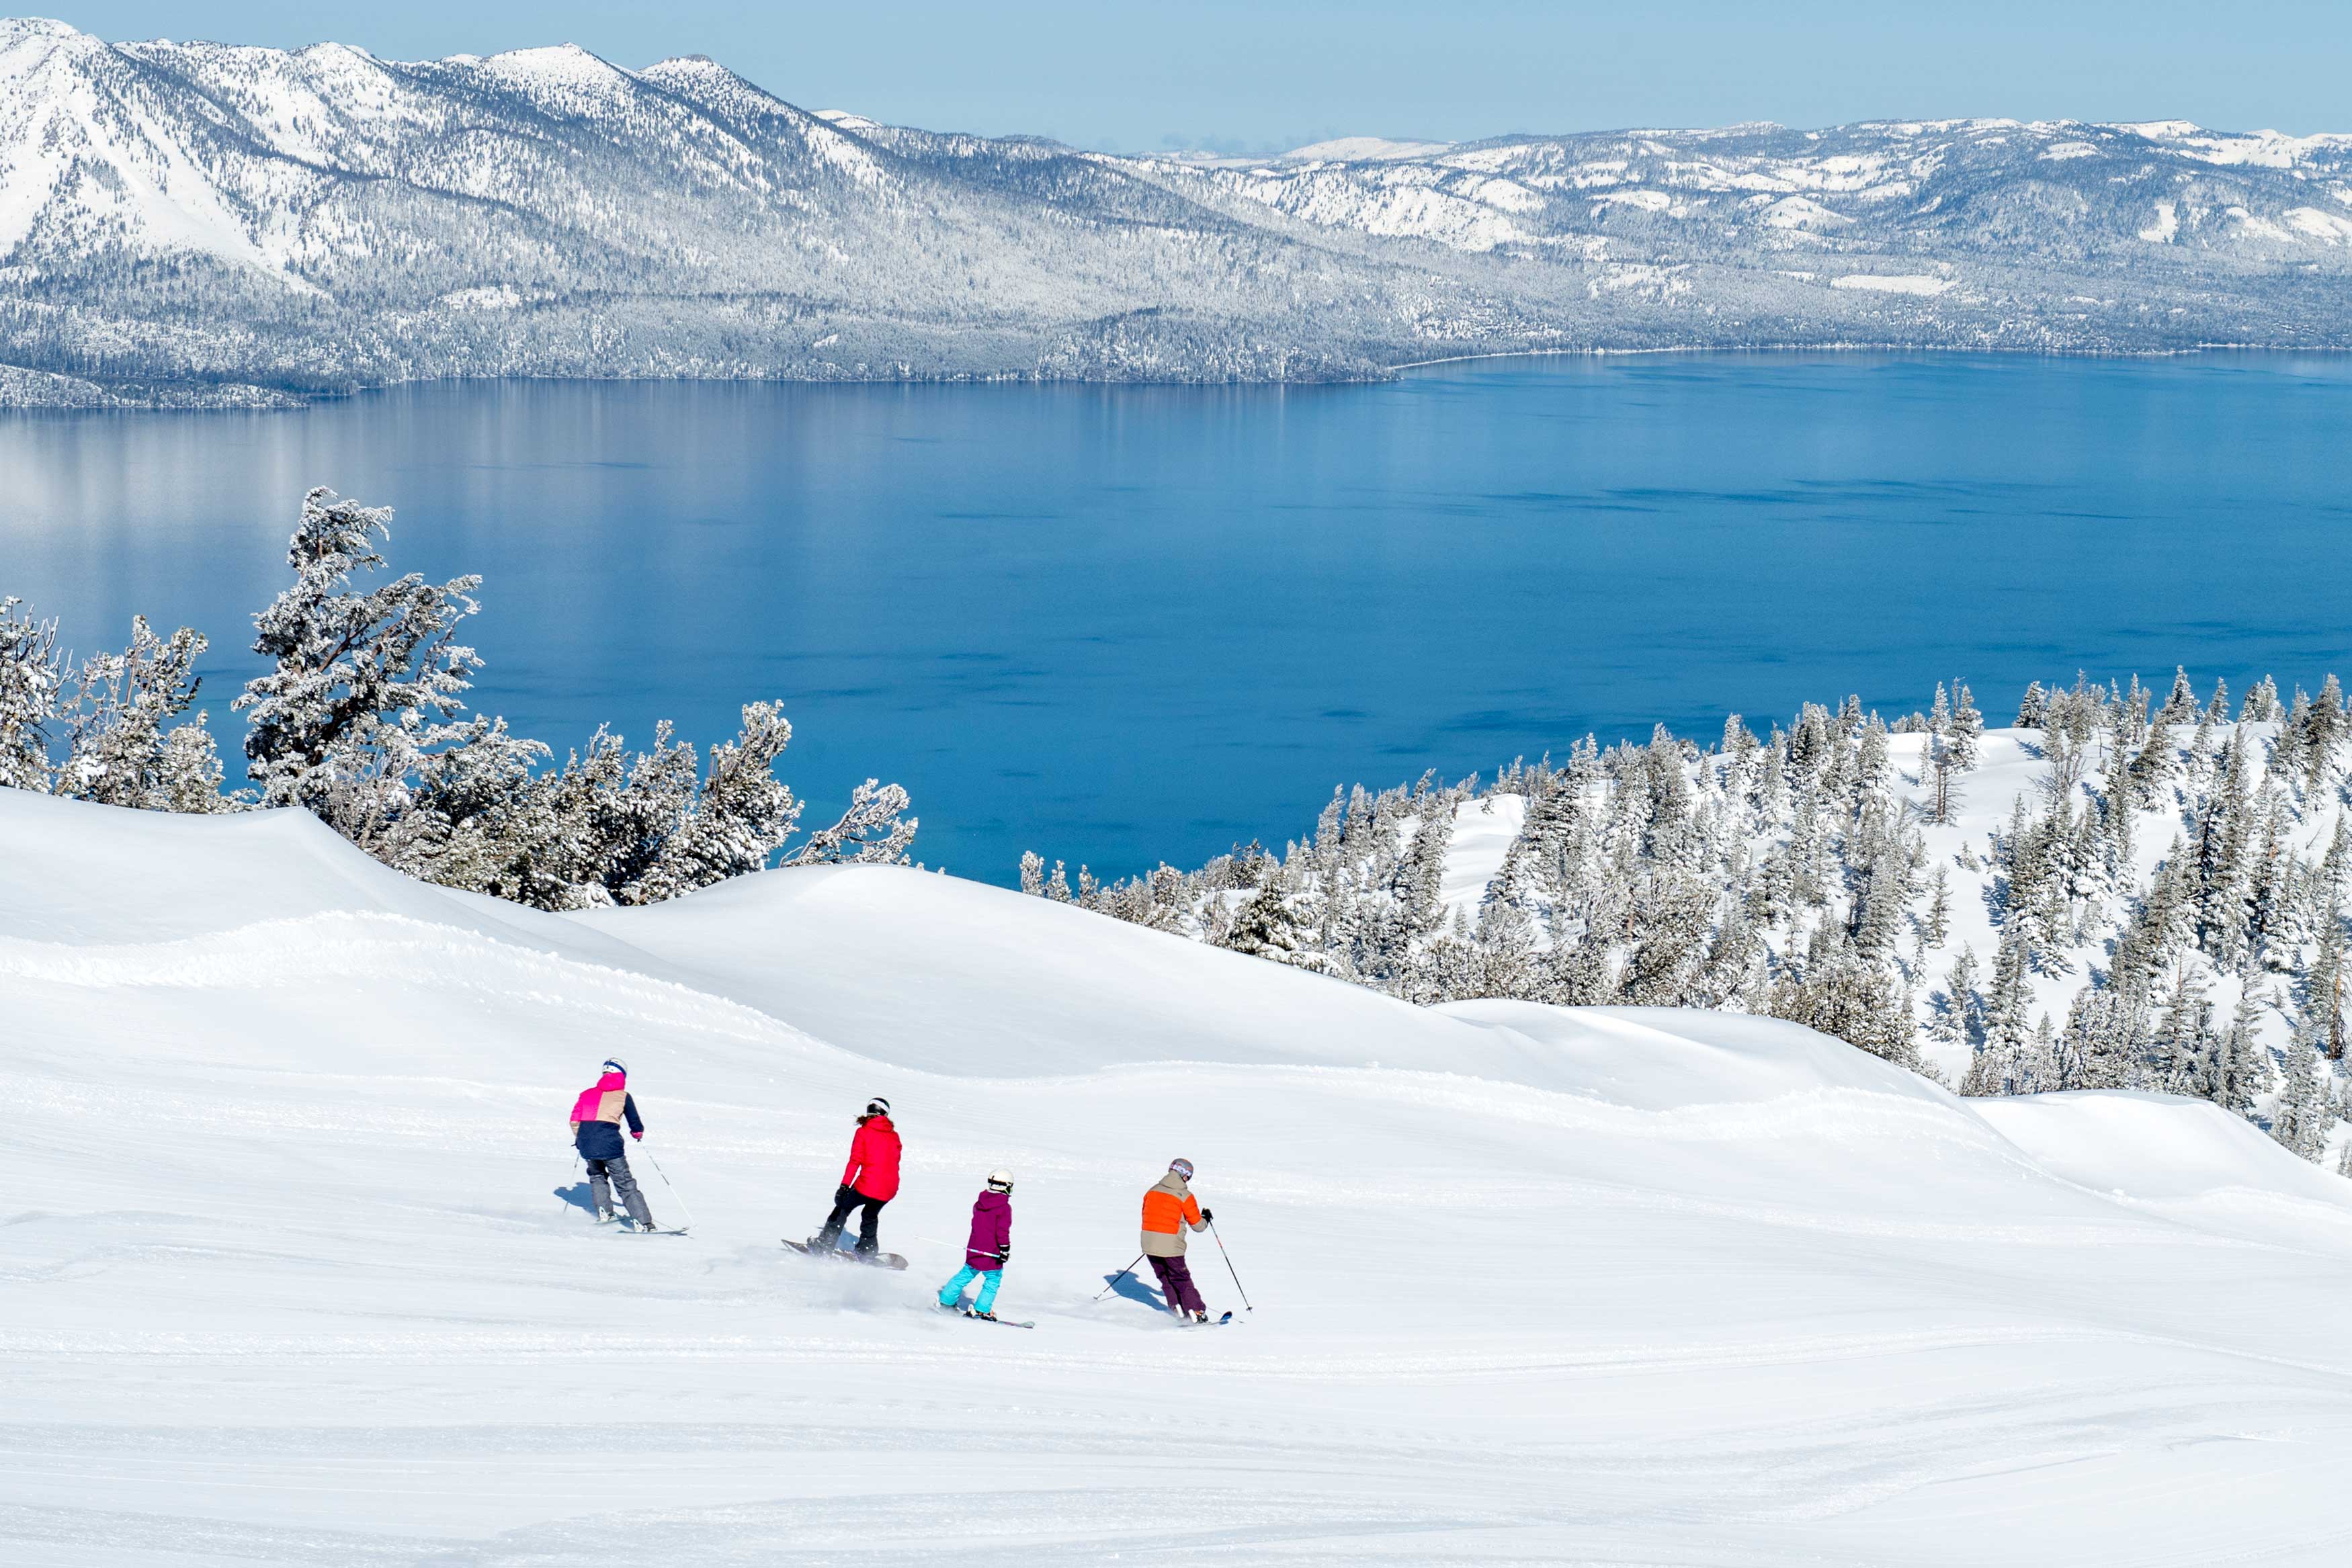 The Ultimate Lake Tahoe Escape Planner - Sunset Magazine